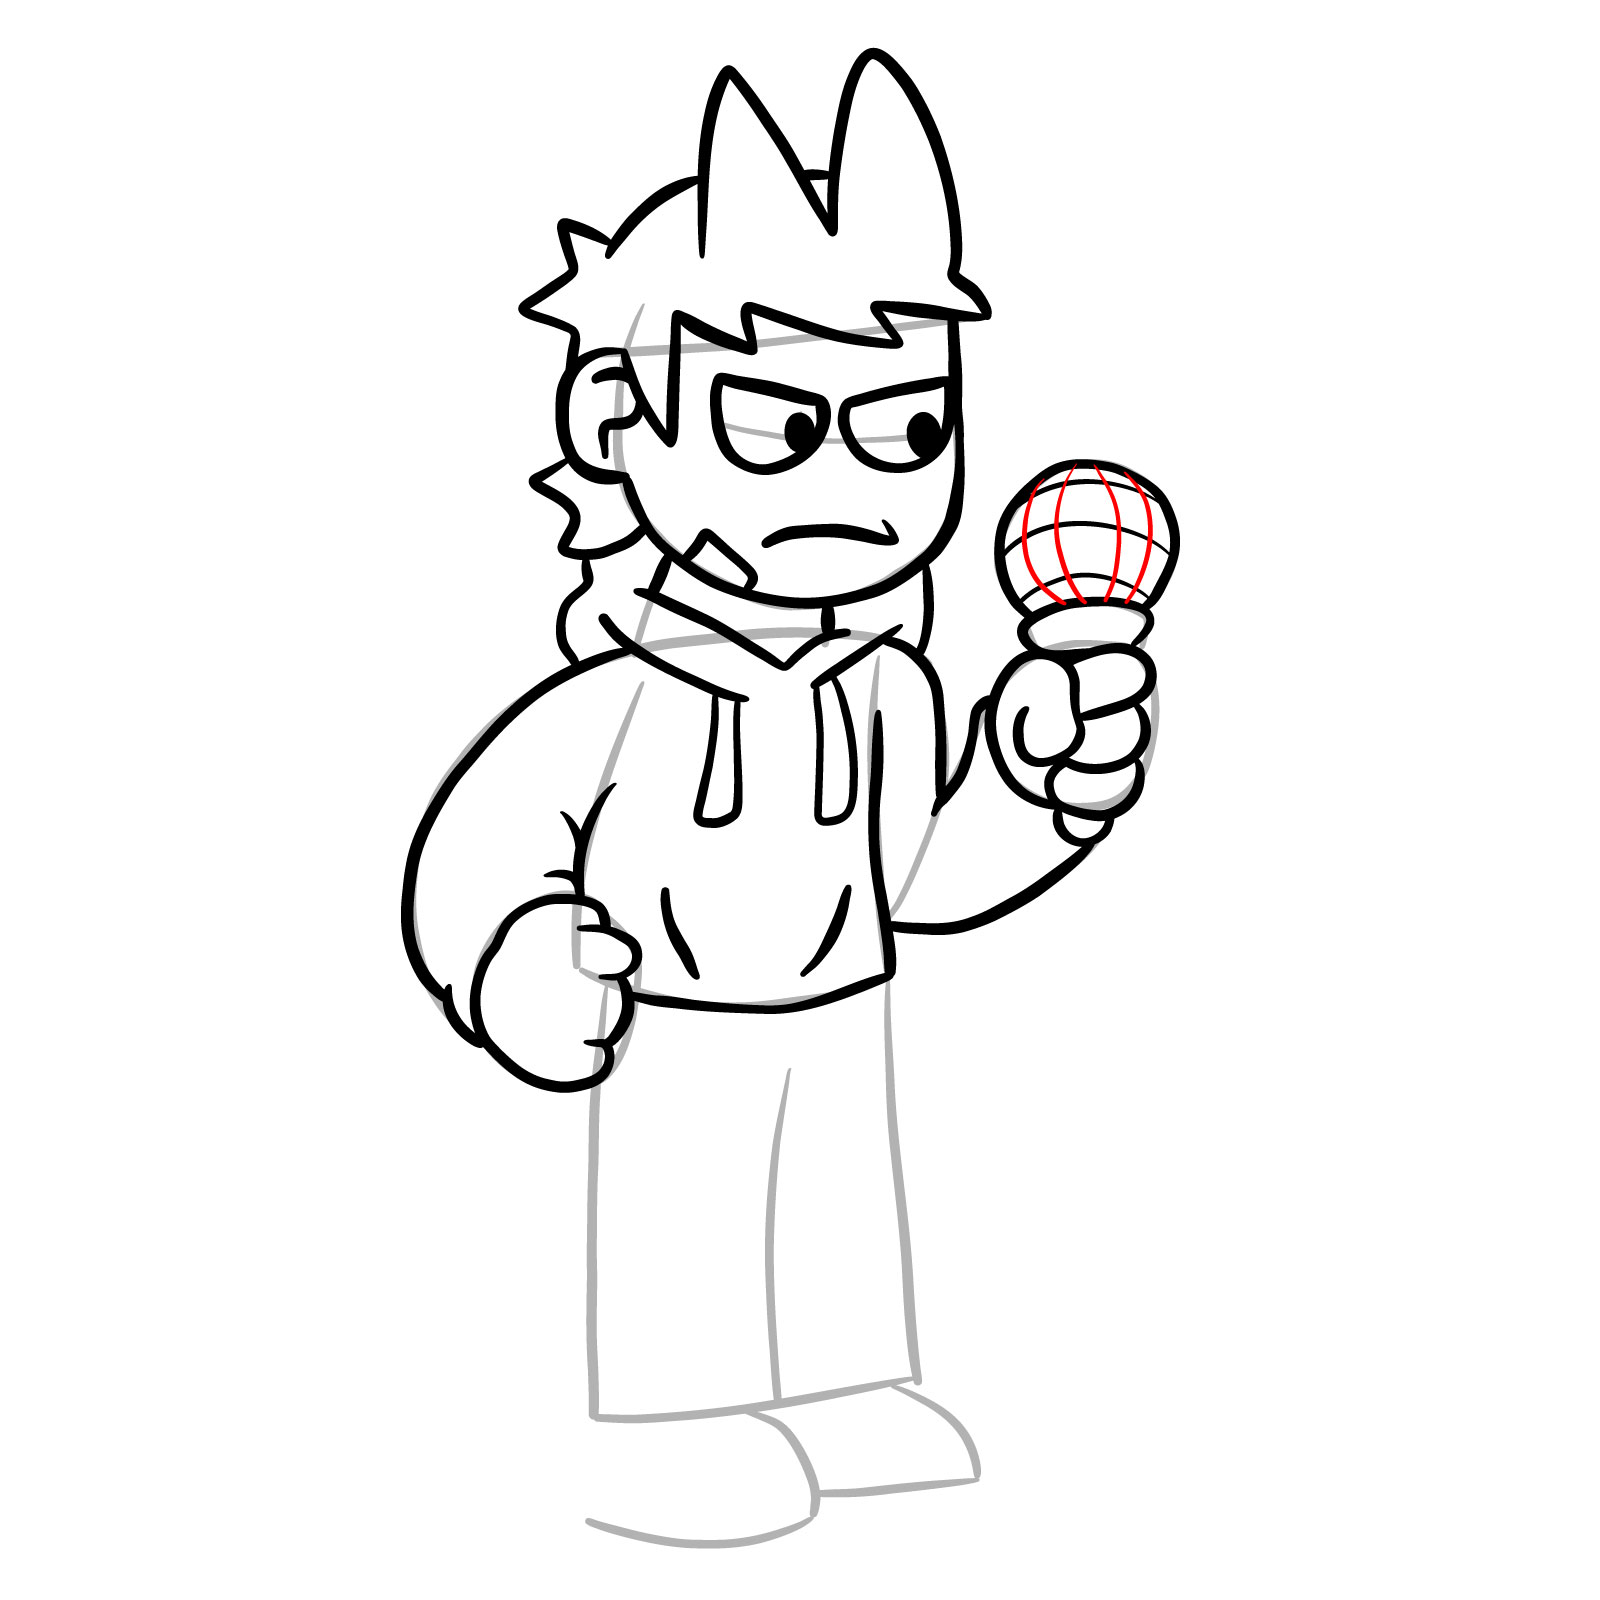 How to draw Tord from FNF - step 21